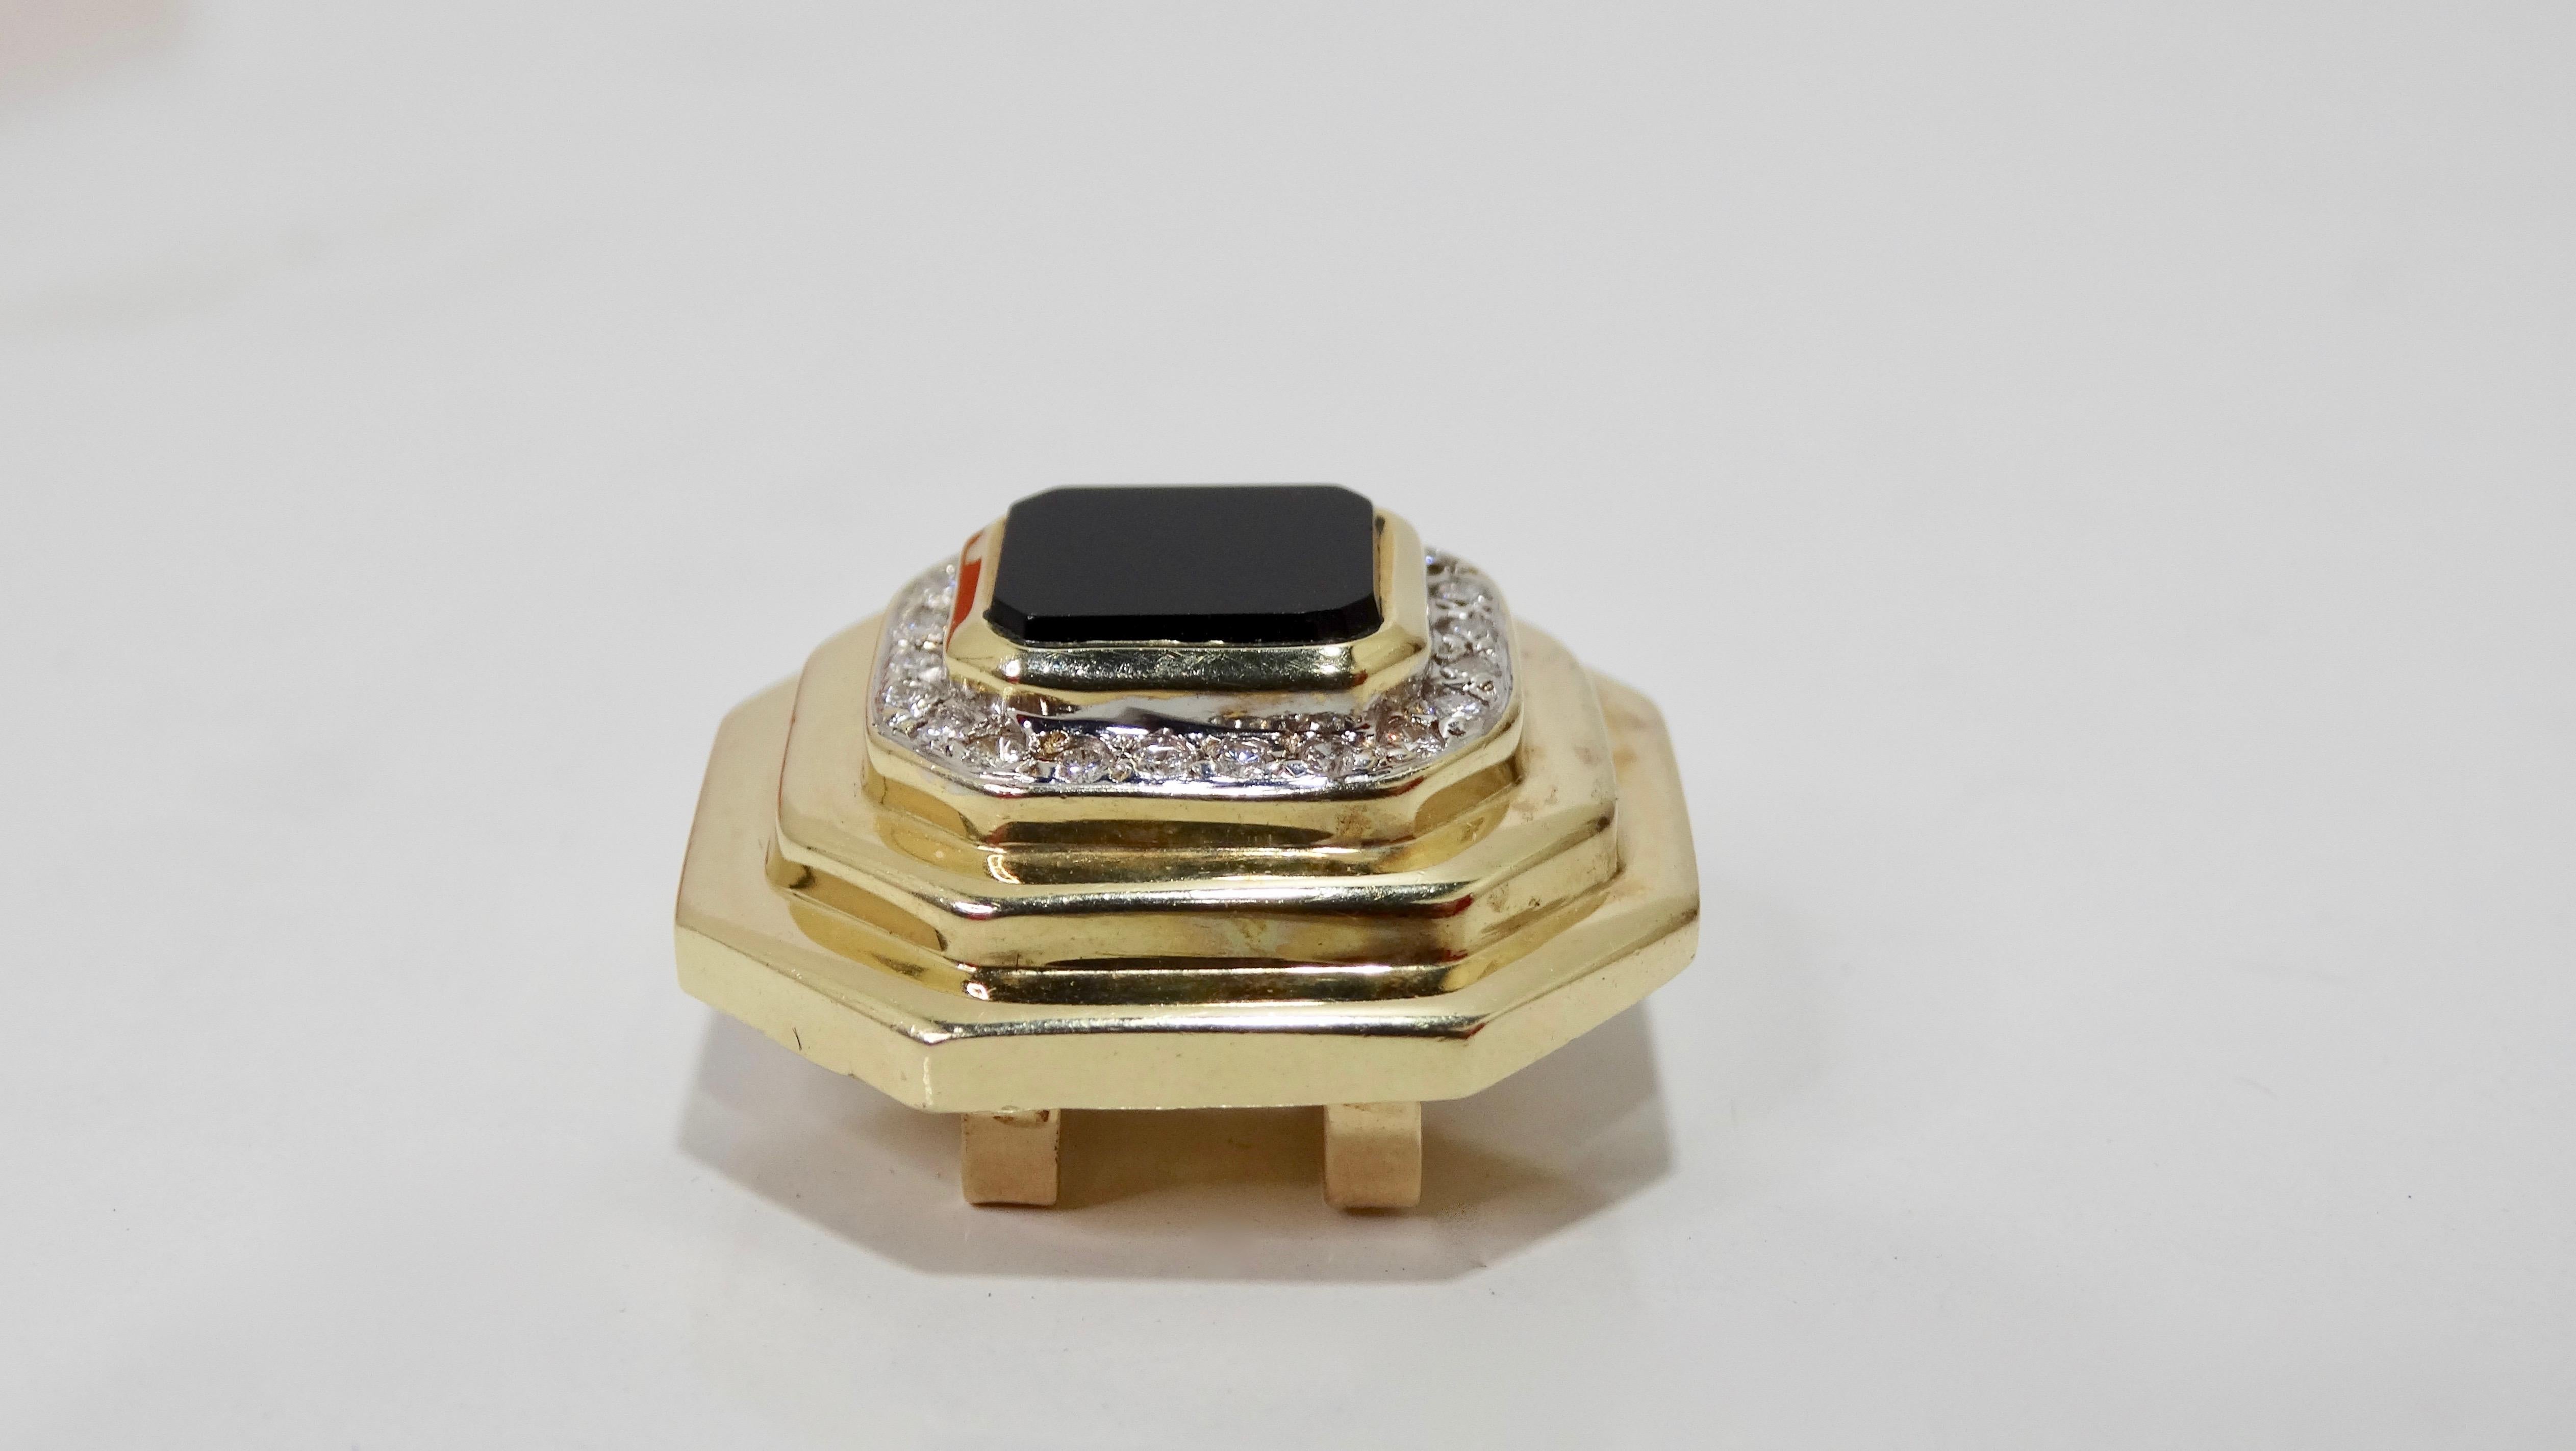 Elevate your look with this stunning Raafty pendant! Circa 1980s, this pendant is crafted from 14k gold and features a step cut octagon shape with 22 VS Diamonds and an Onyx center stone. Elegant and chic, this piece can be worn on a necklace or as